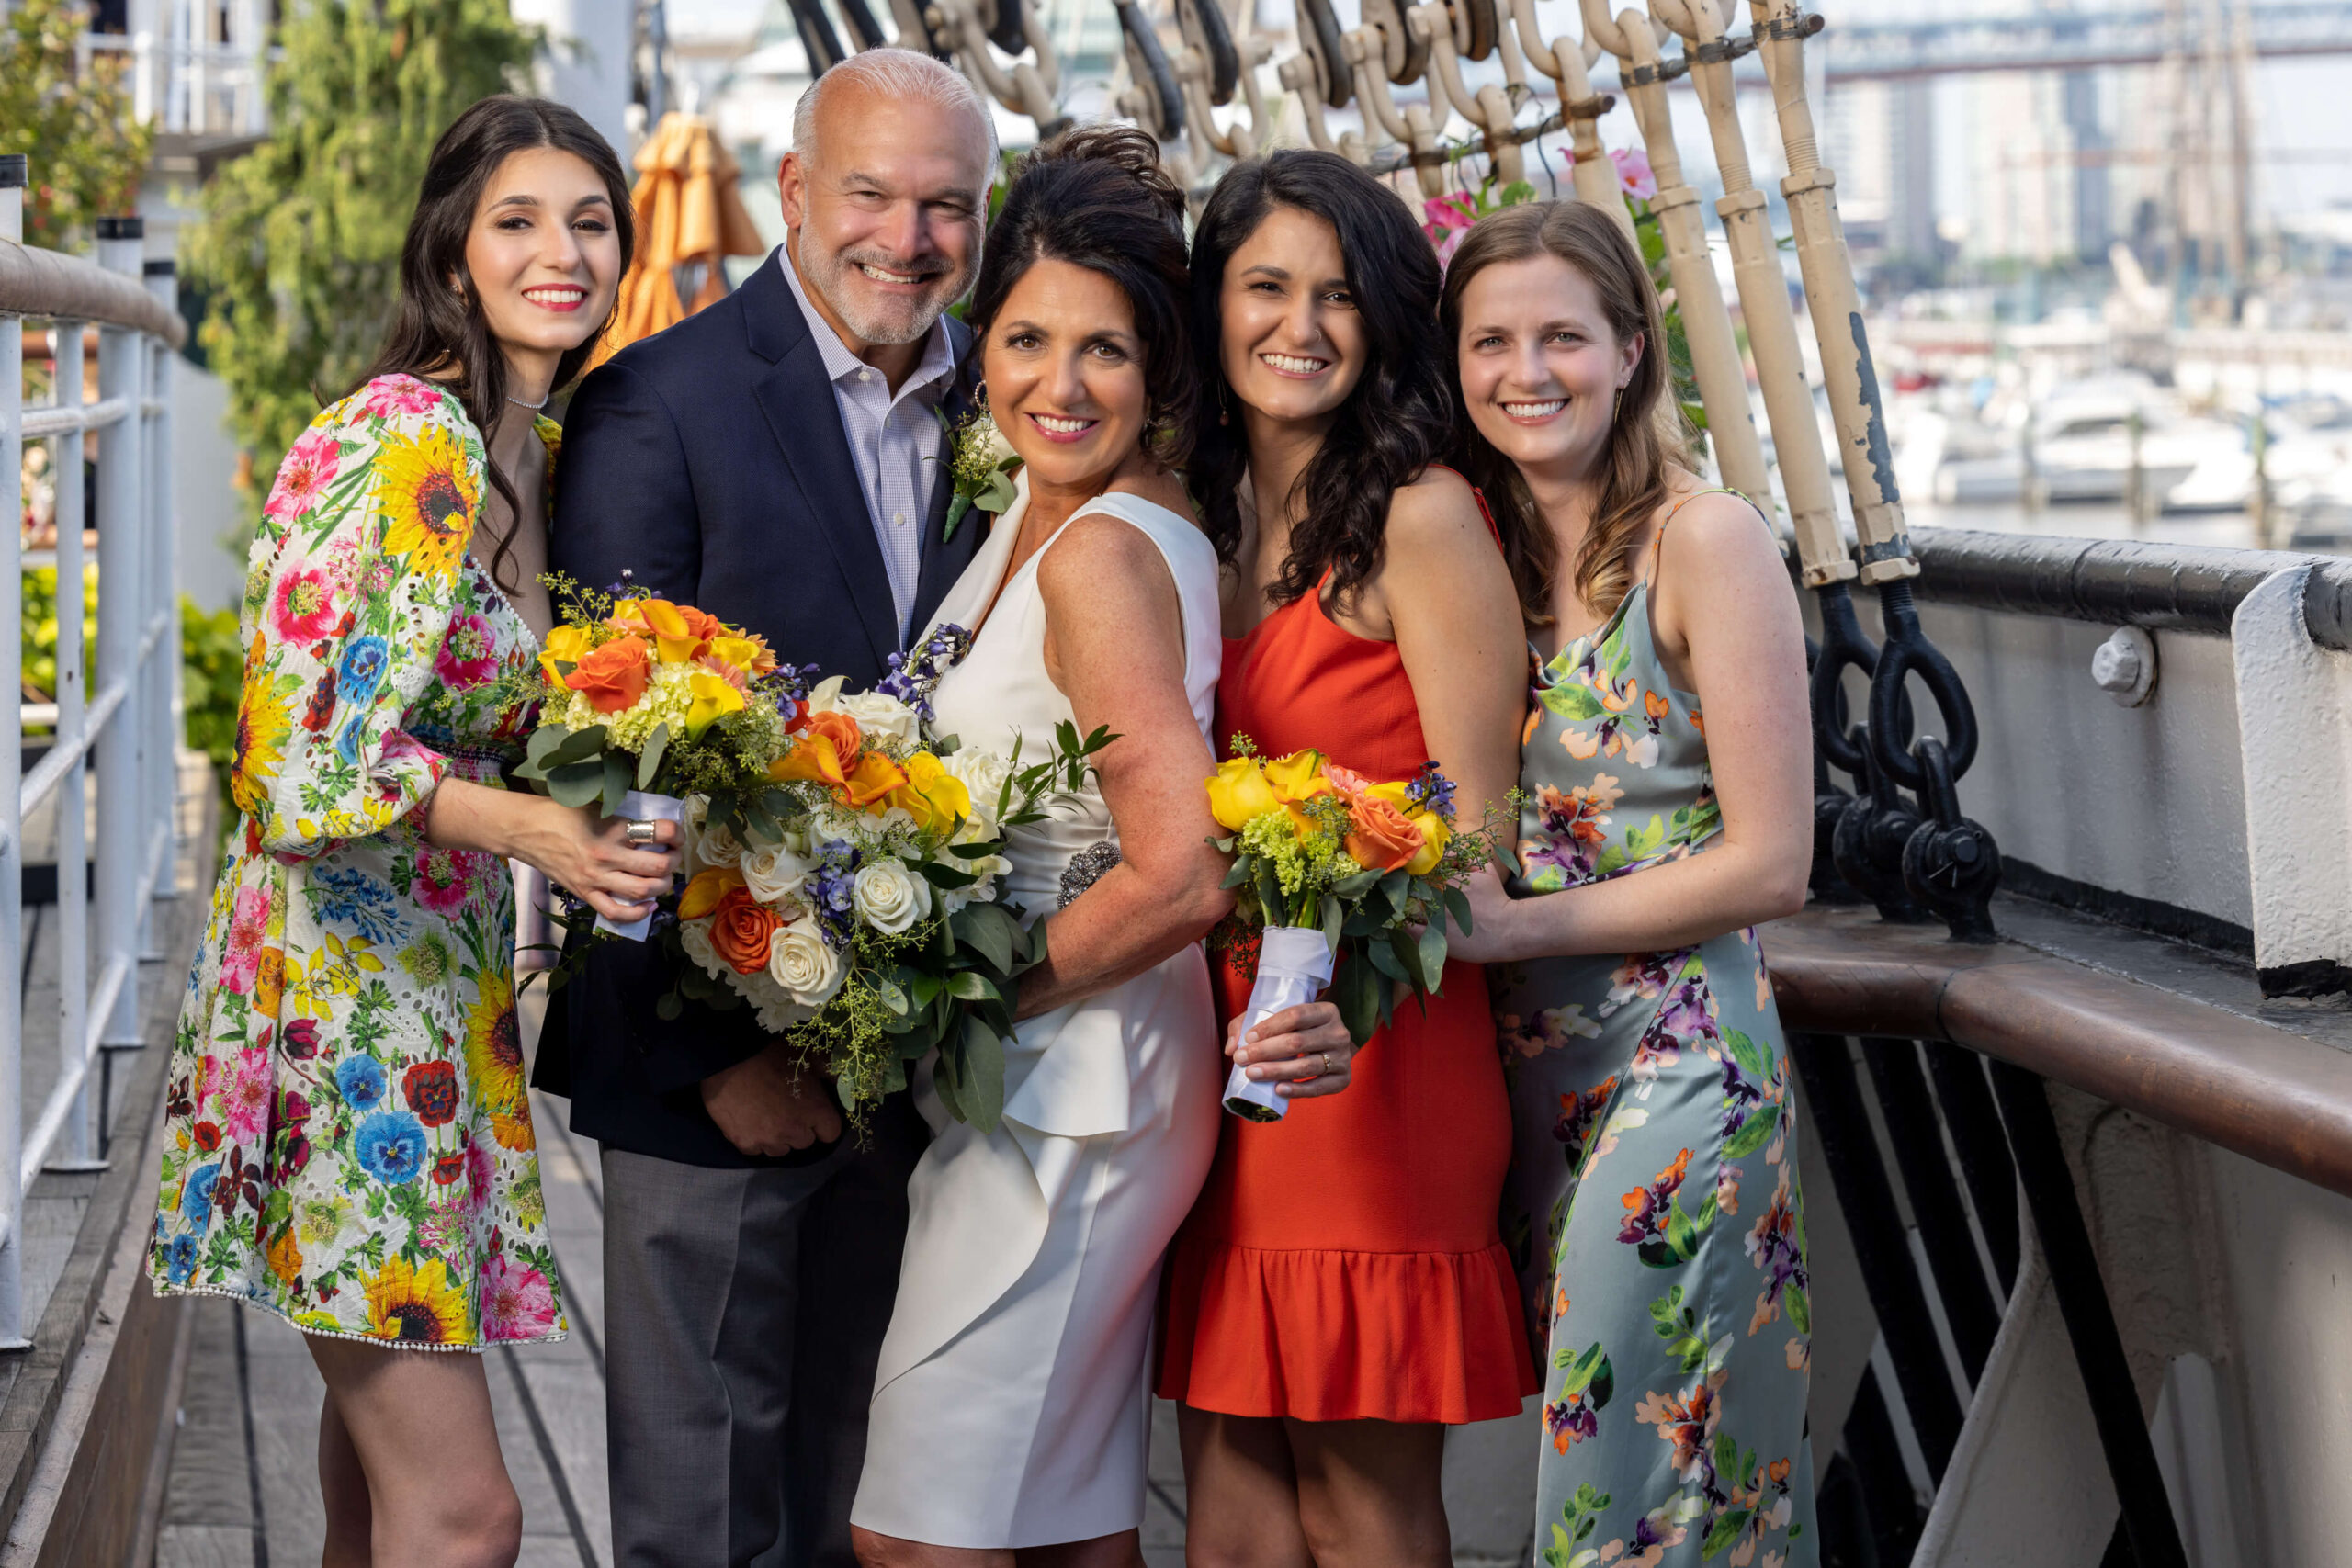 a group of people posing for a wedding photo on the deck of a boat